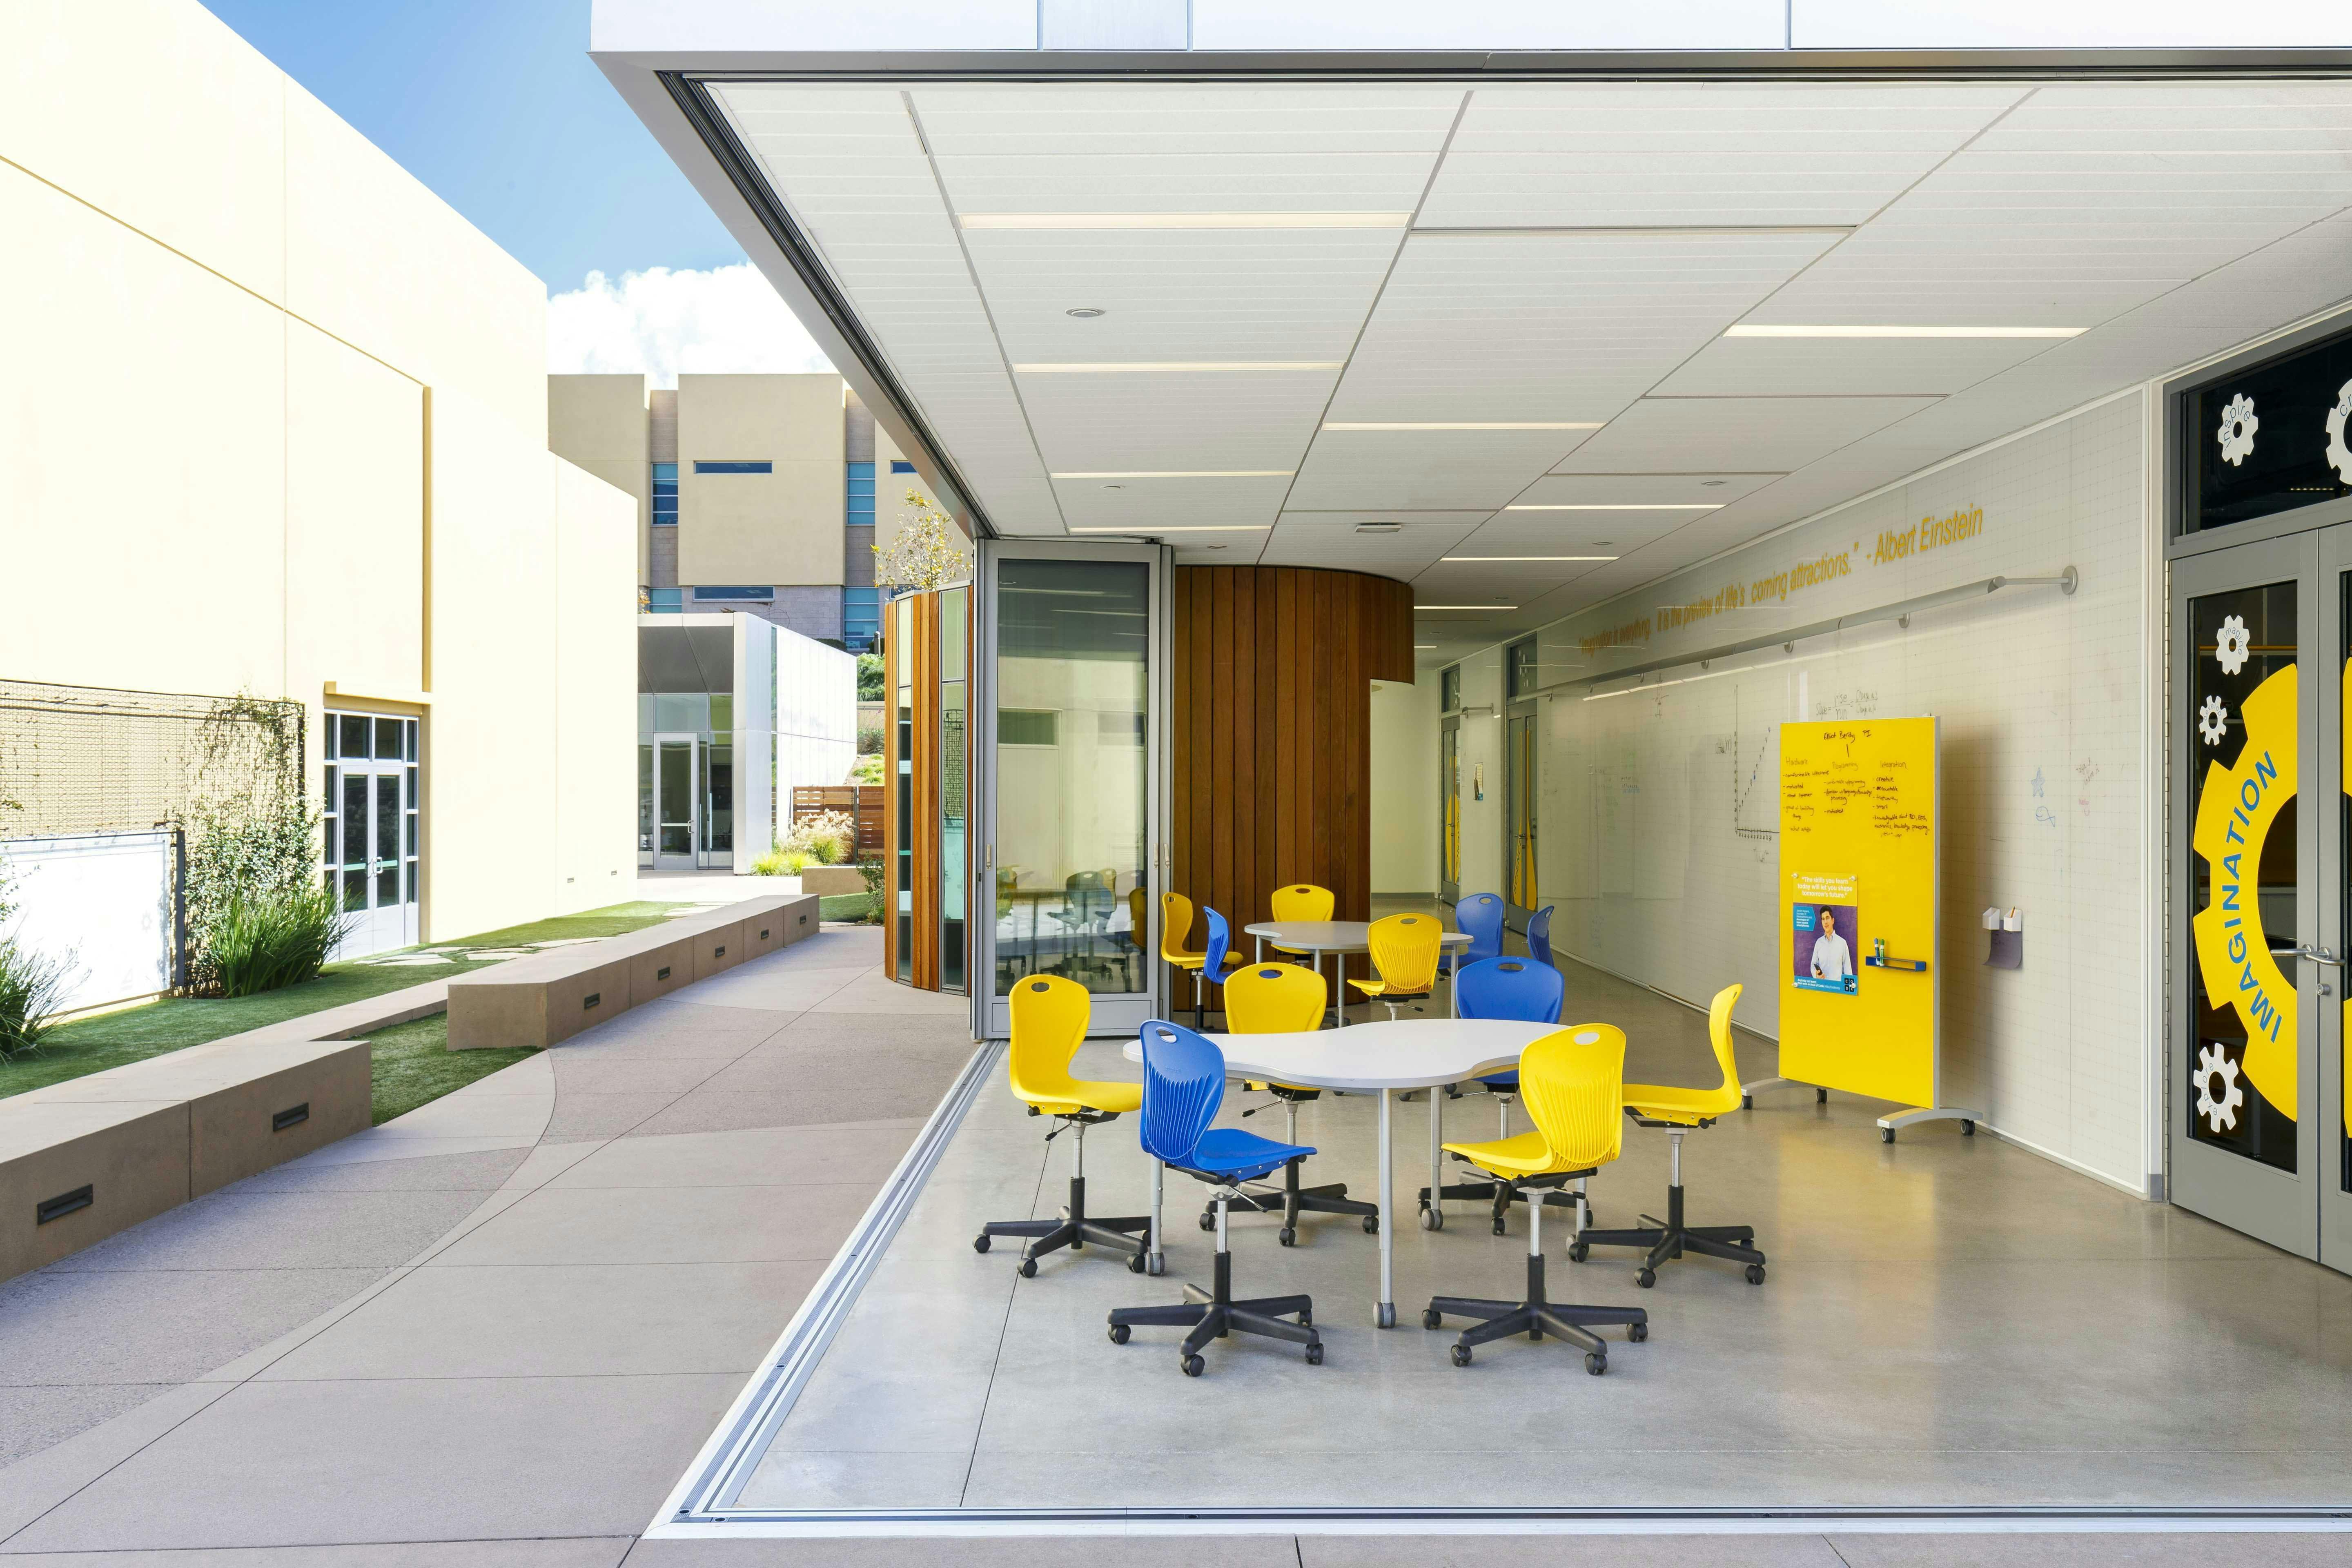 21st-century-classroom-design-with-sliding-glass-wall